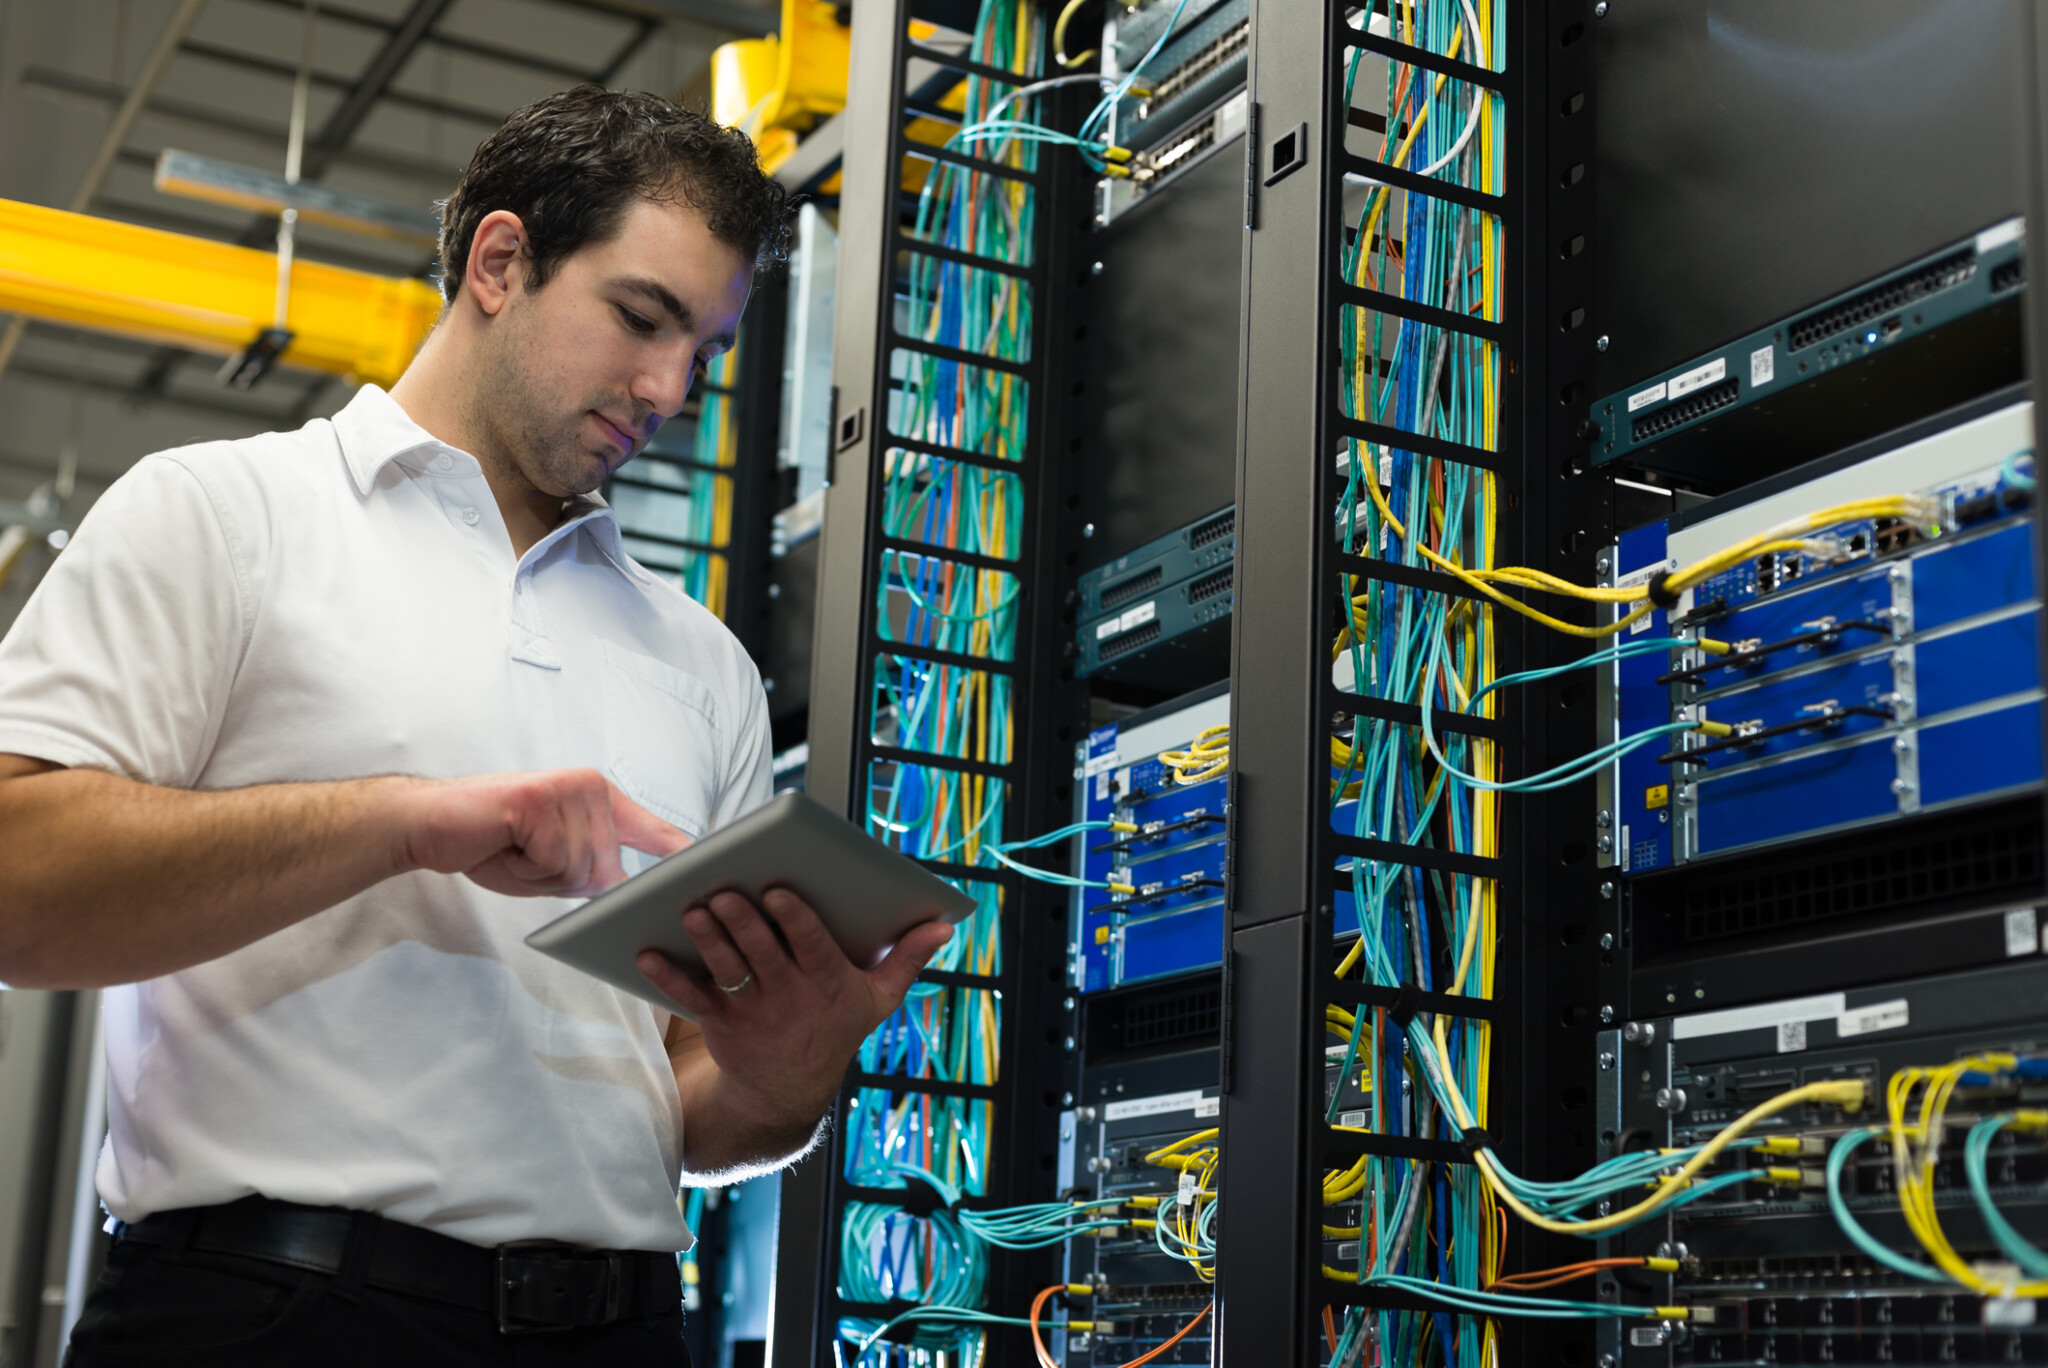 Outsourced Network Engineers In Wichita Kansas